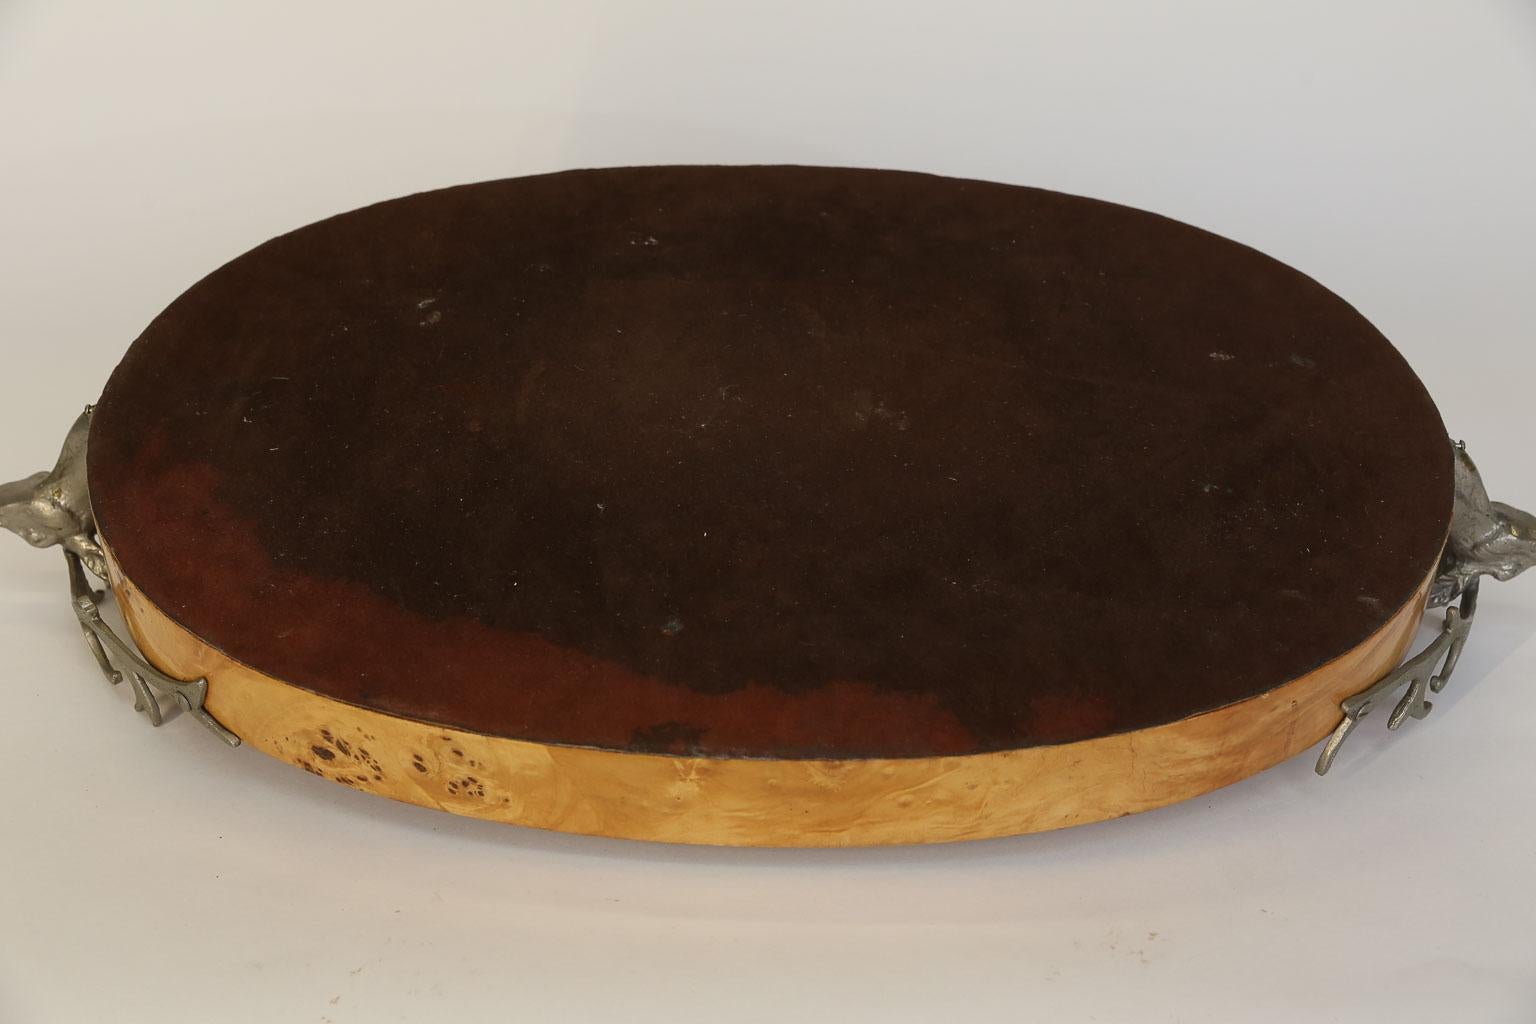 Burl Wood Tray with Stag Head Handles 3